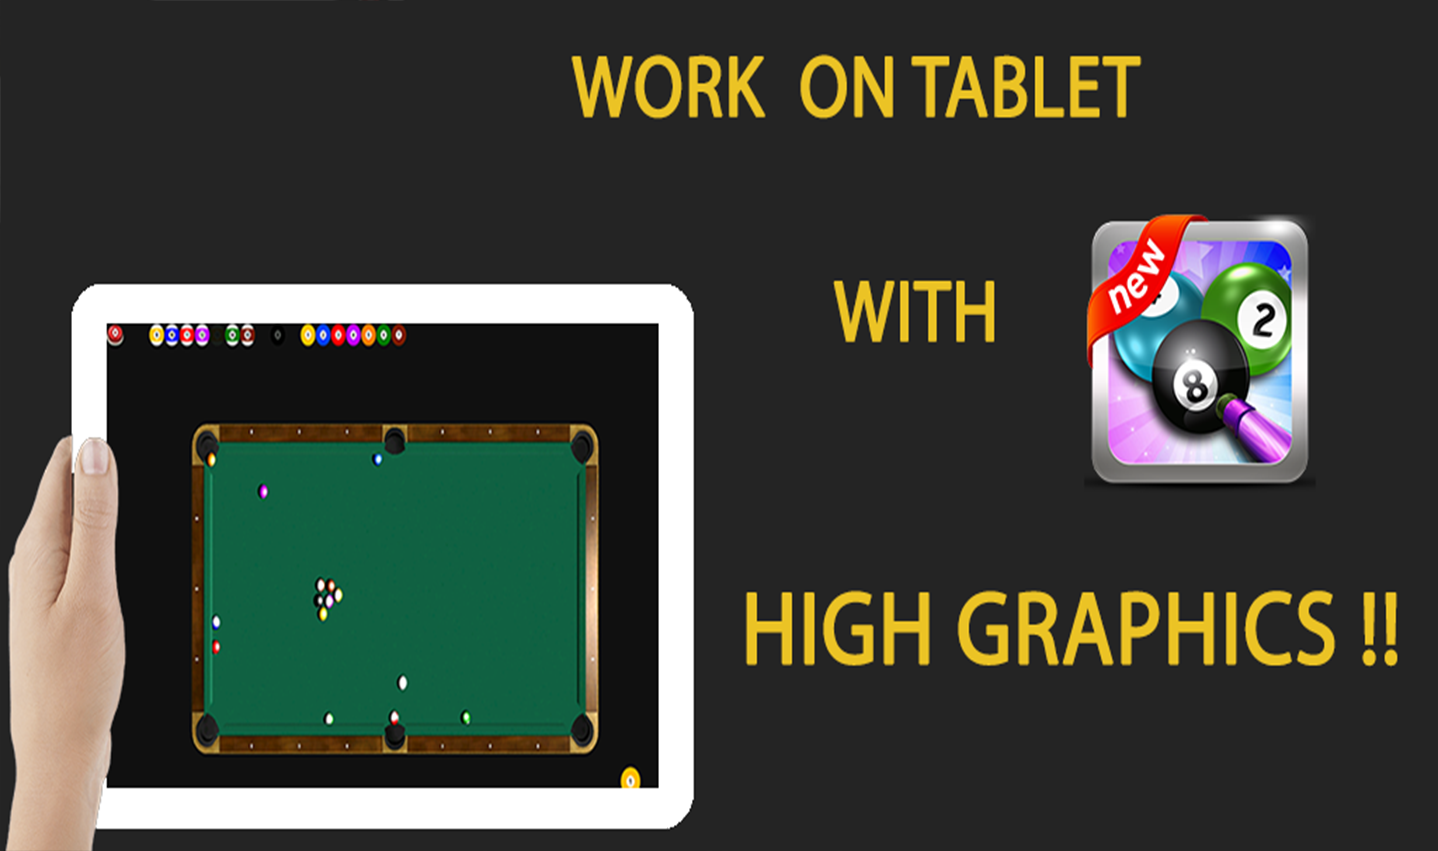 8 ball skill pool for Android - APK Download - 